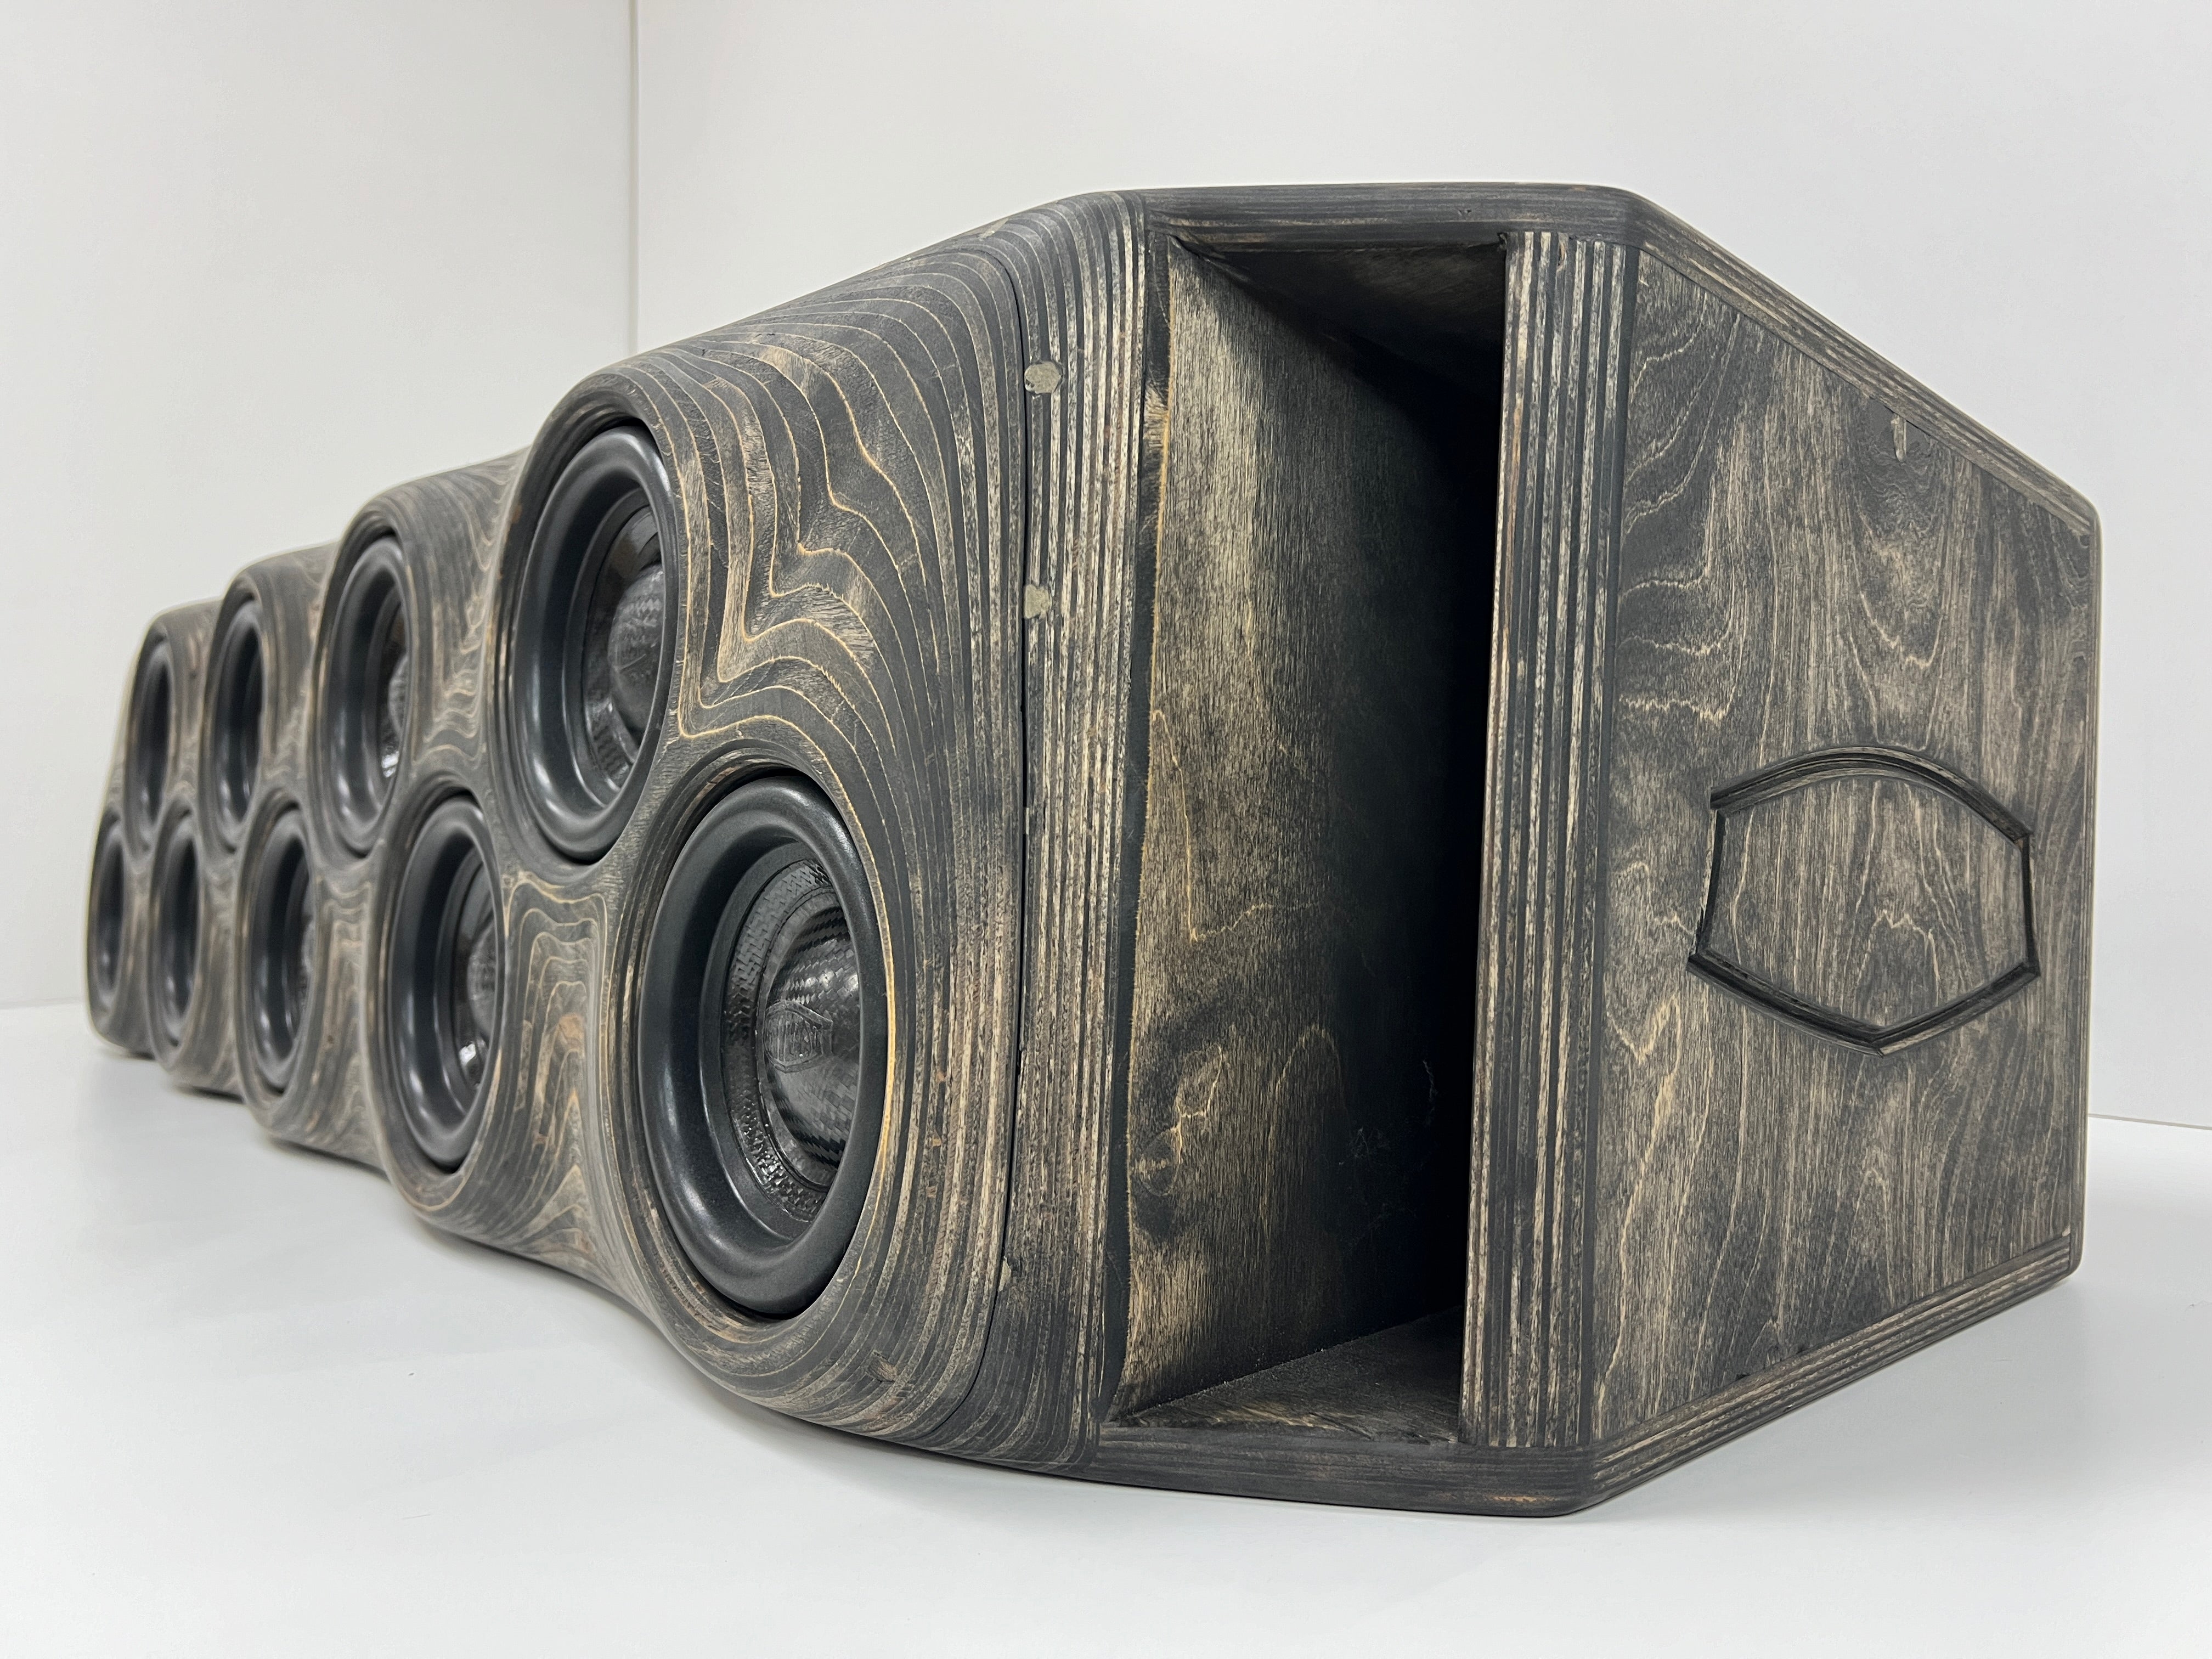 Ford CrewCab 9 x 6.5” with 3.75 " Seat Lift - USED, INCLUDES SUBWOOFERS